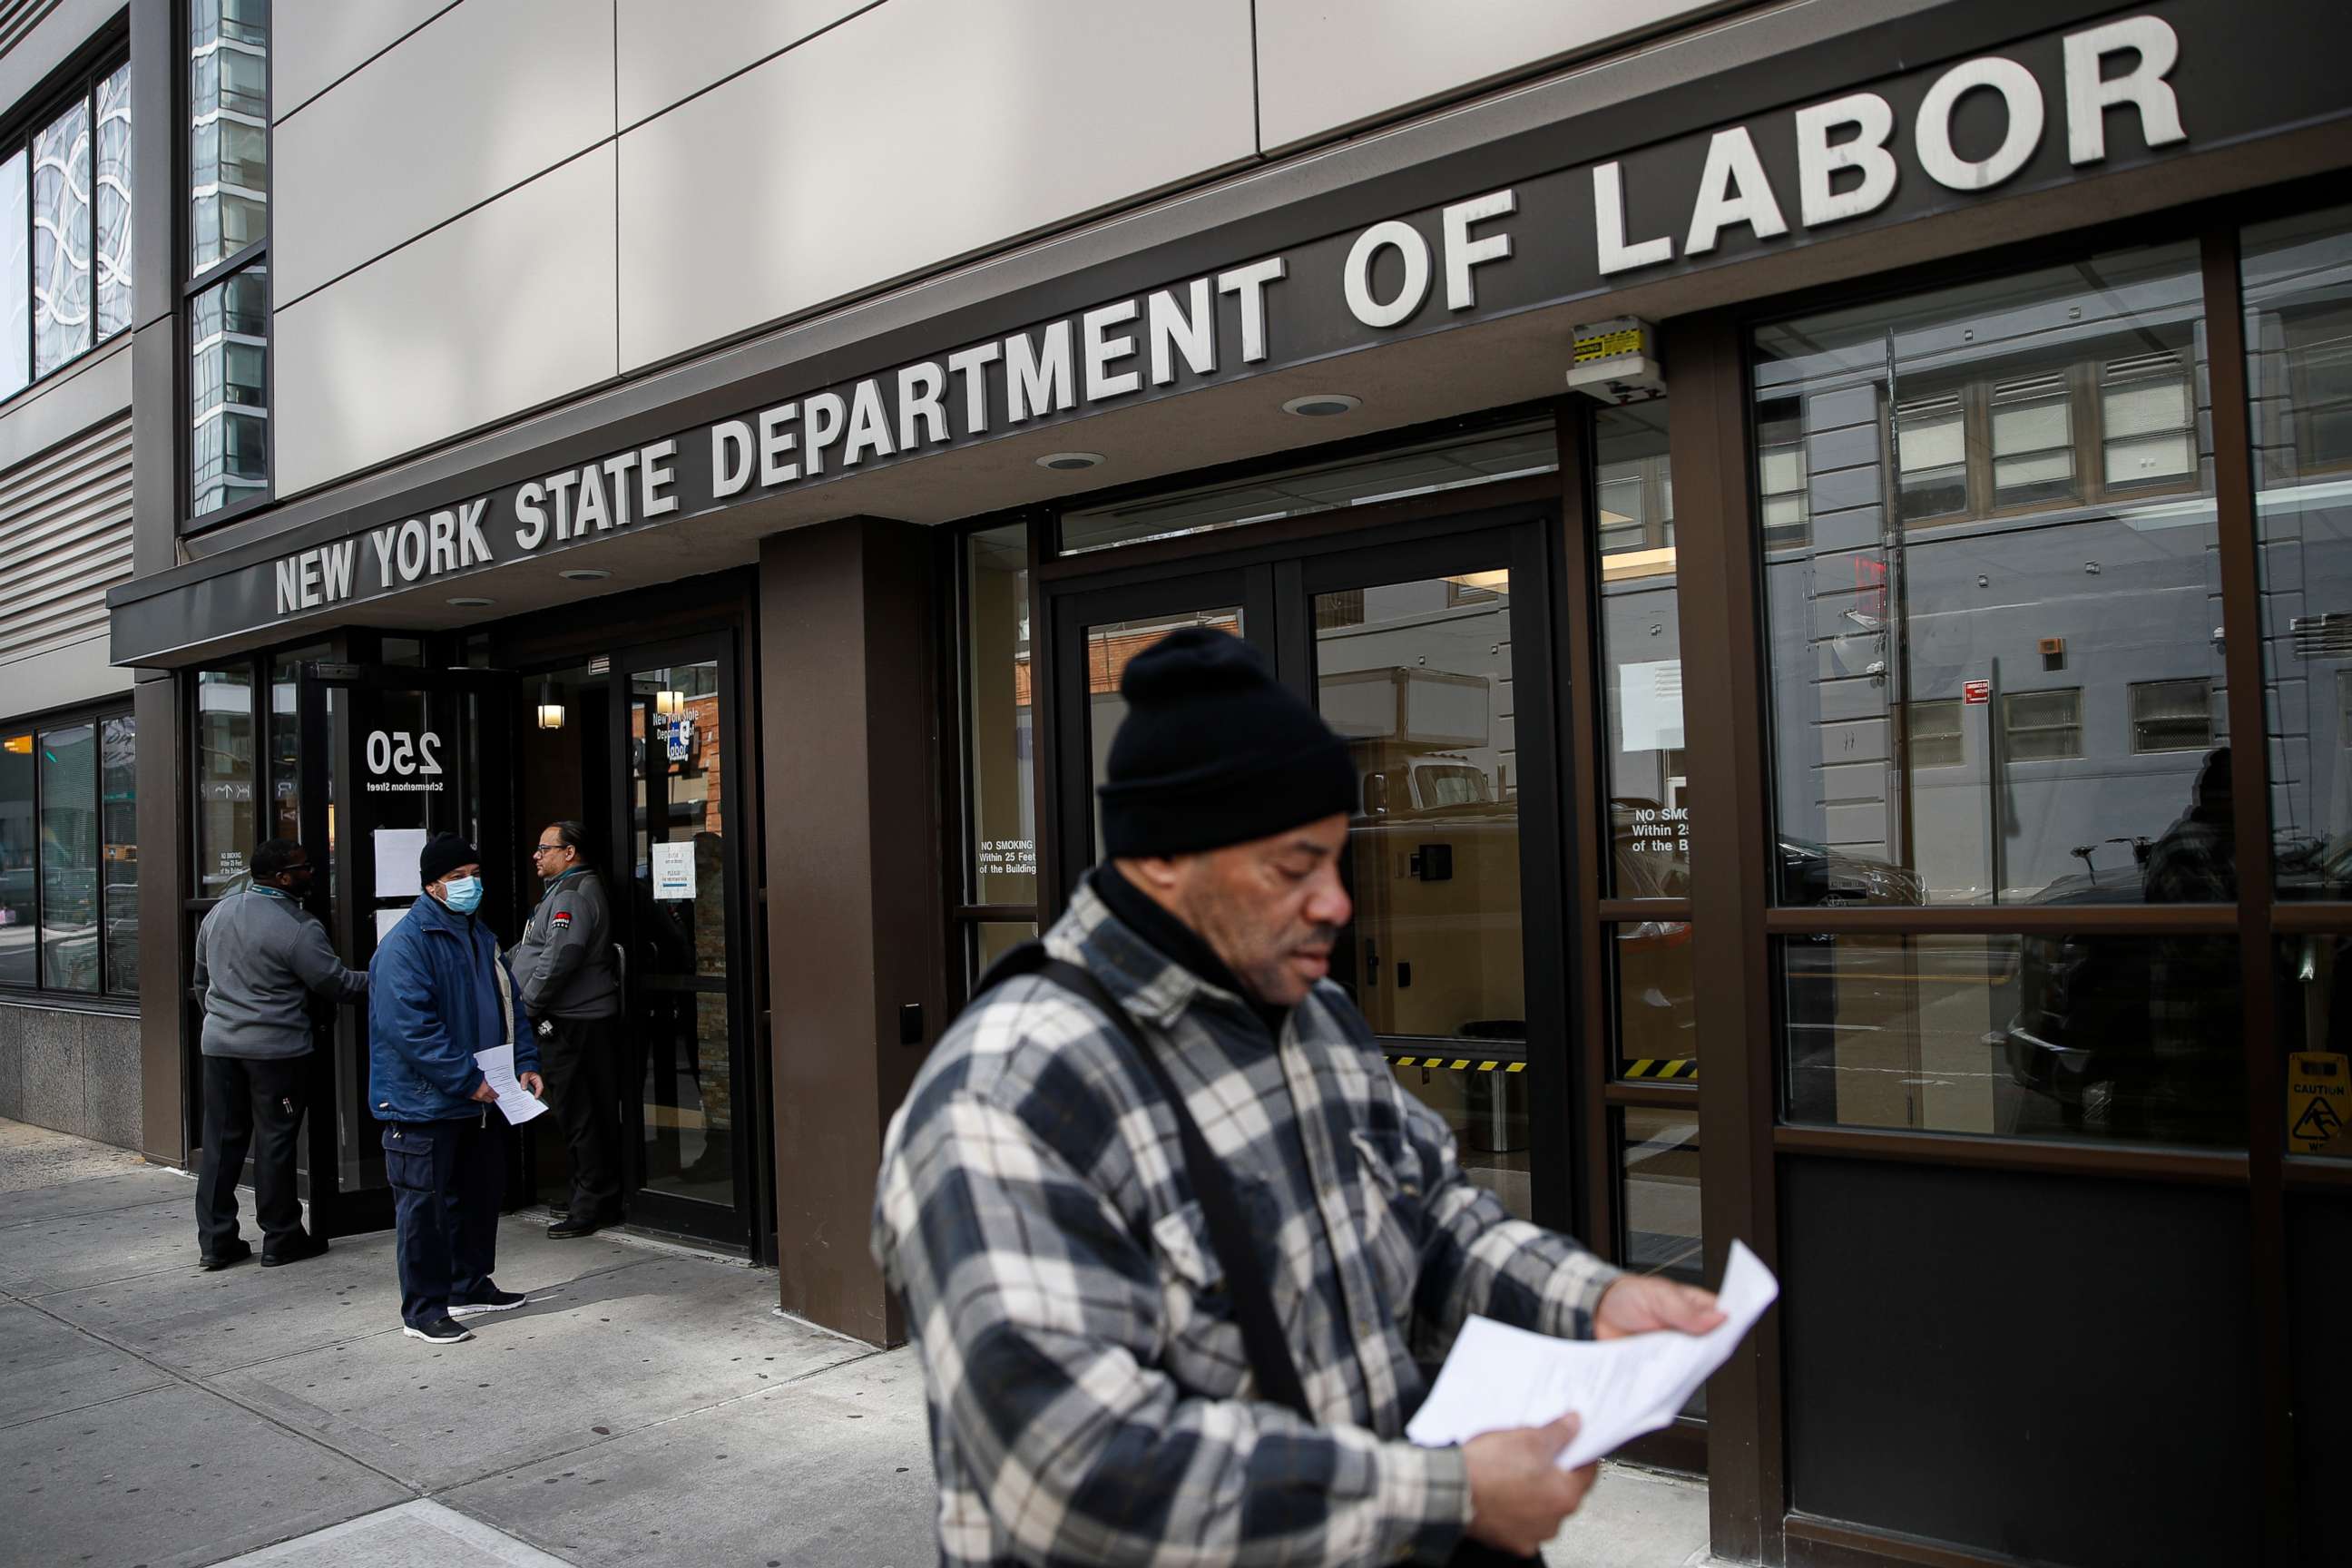 PHOTO: Visitors to the Department of Labor are turned away at the door by personnel due to closures over coronavirus concerns, Wednesday, March 18, 2020, in New York.